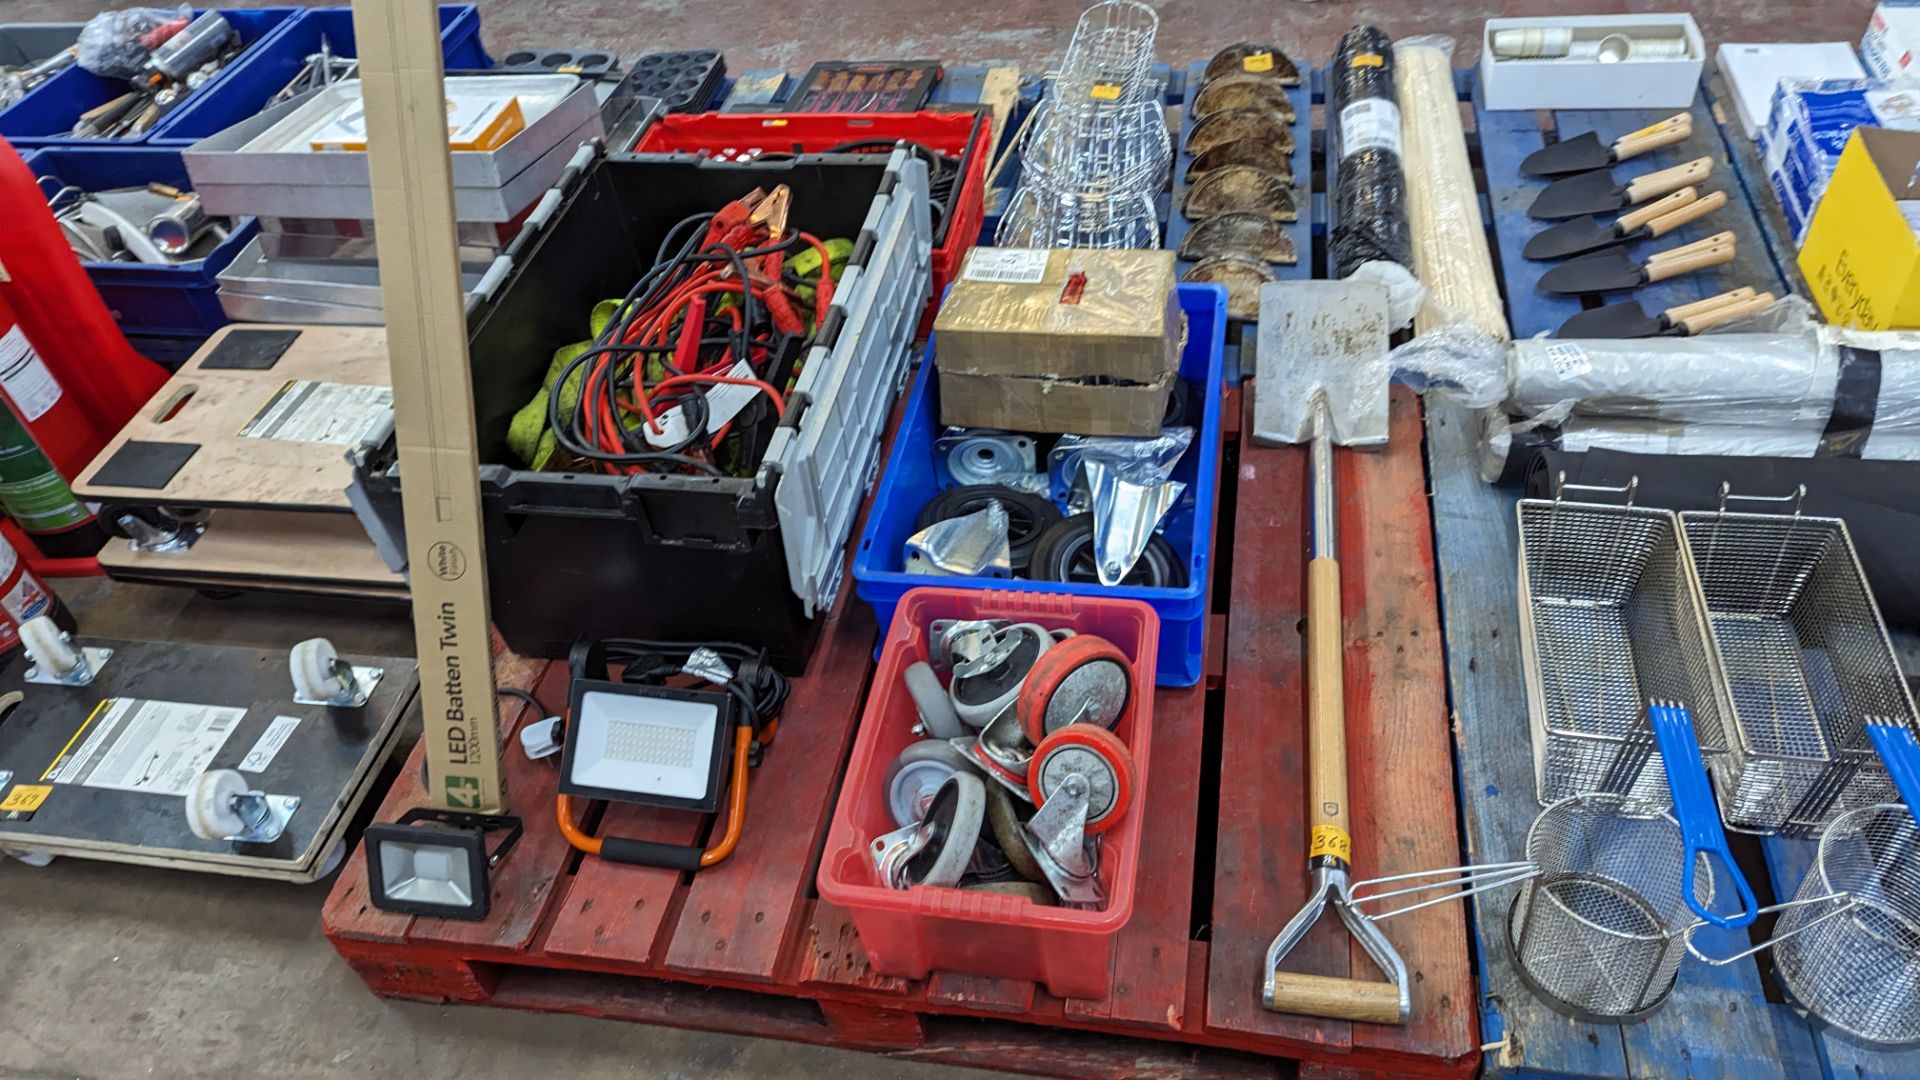 The contents of a pallet including long handle spade, jump start cables, safety harnesses, wheels, l